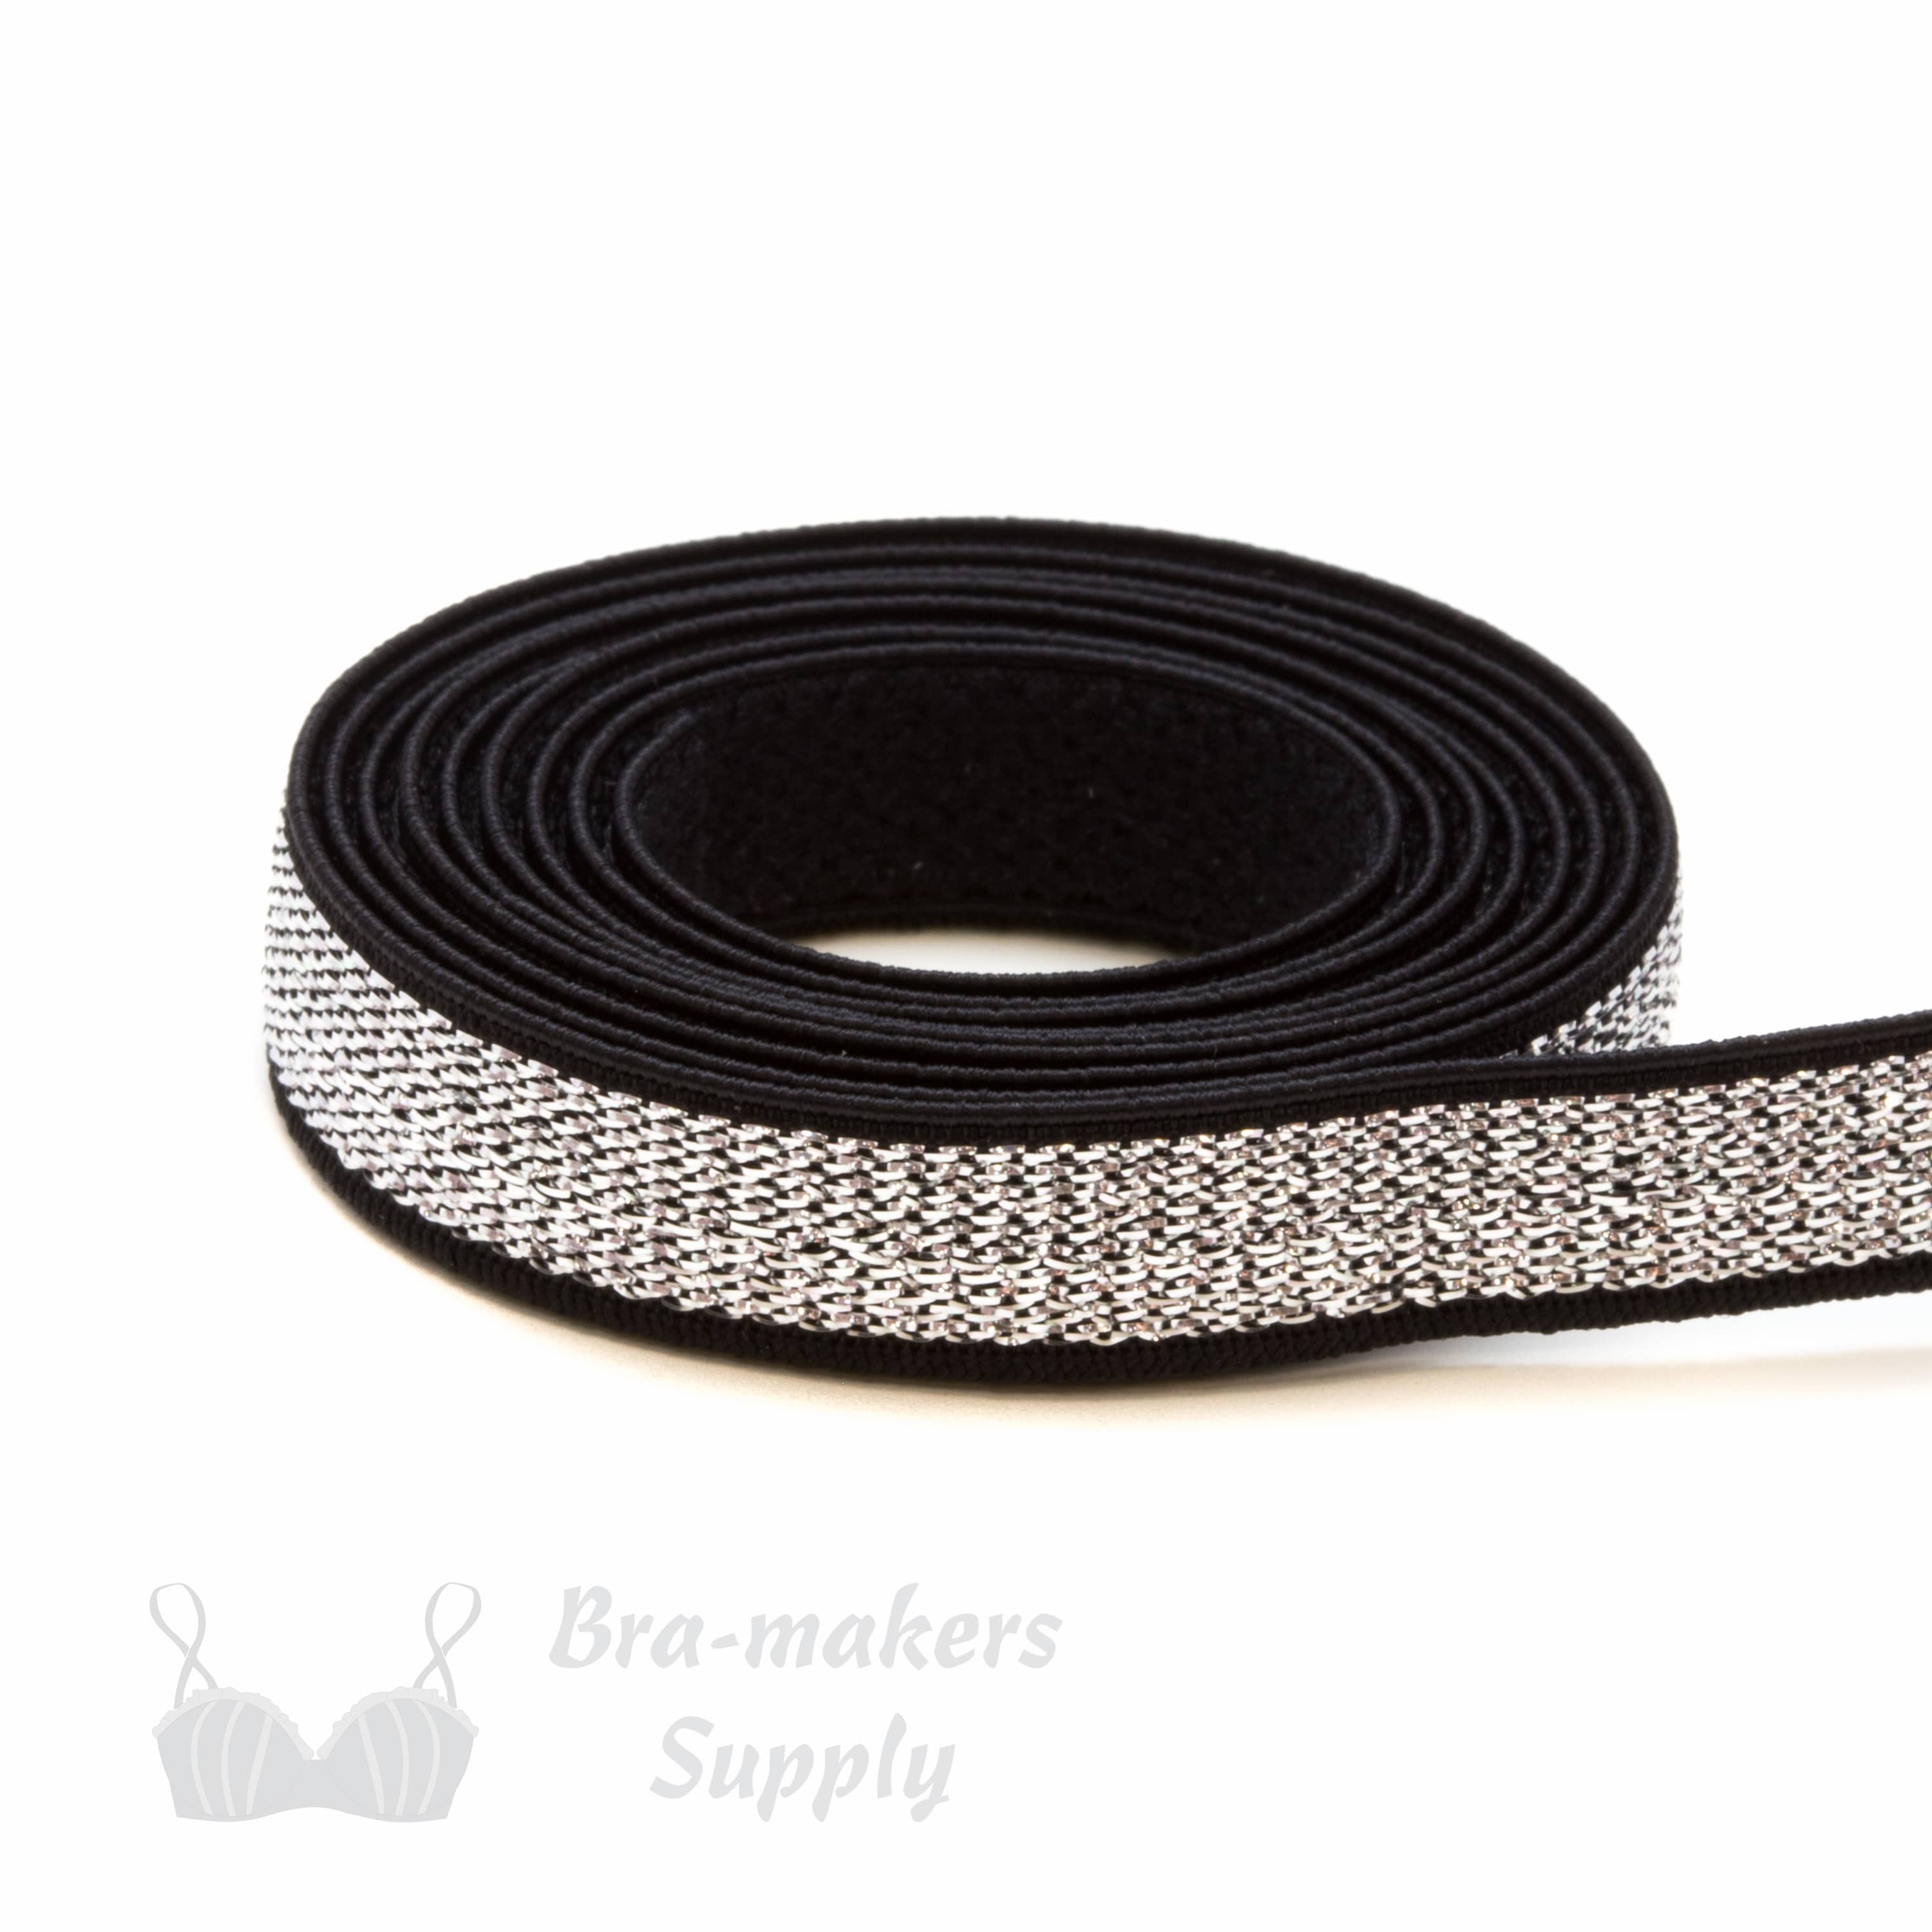 ES-3 - Metallic Bra Strap Elastic - Bra-makers Supply the leading global  source for bra making and corset making supplies